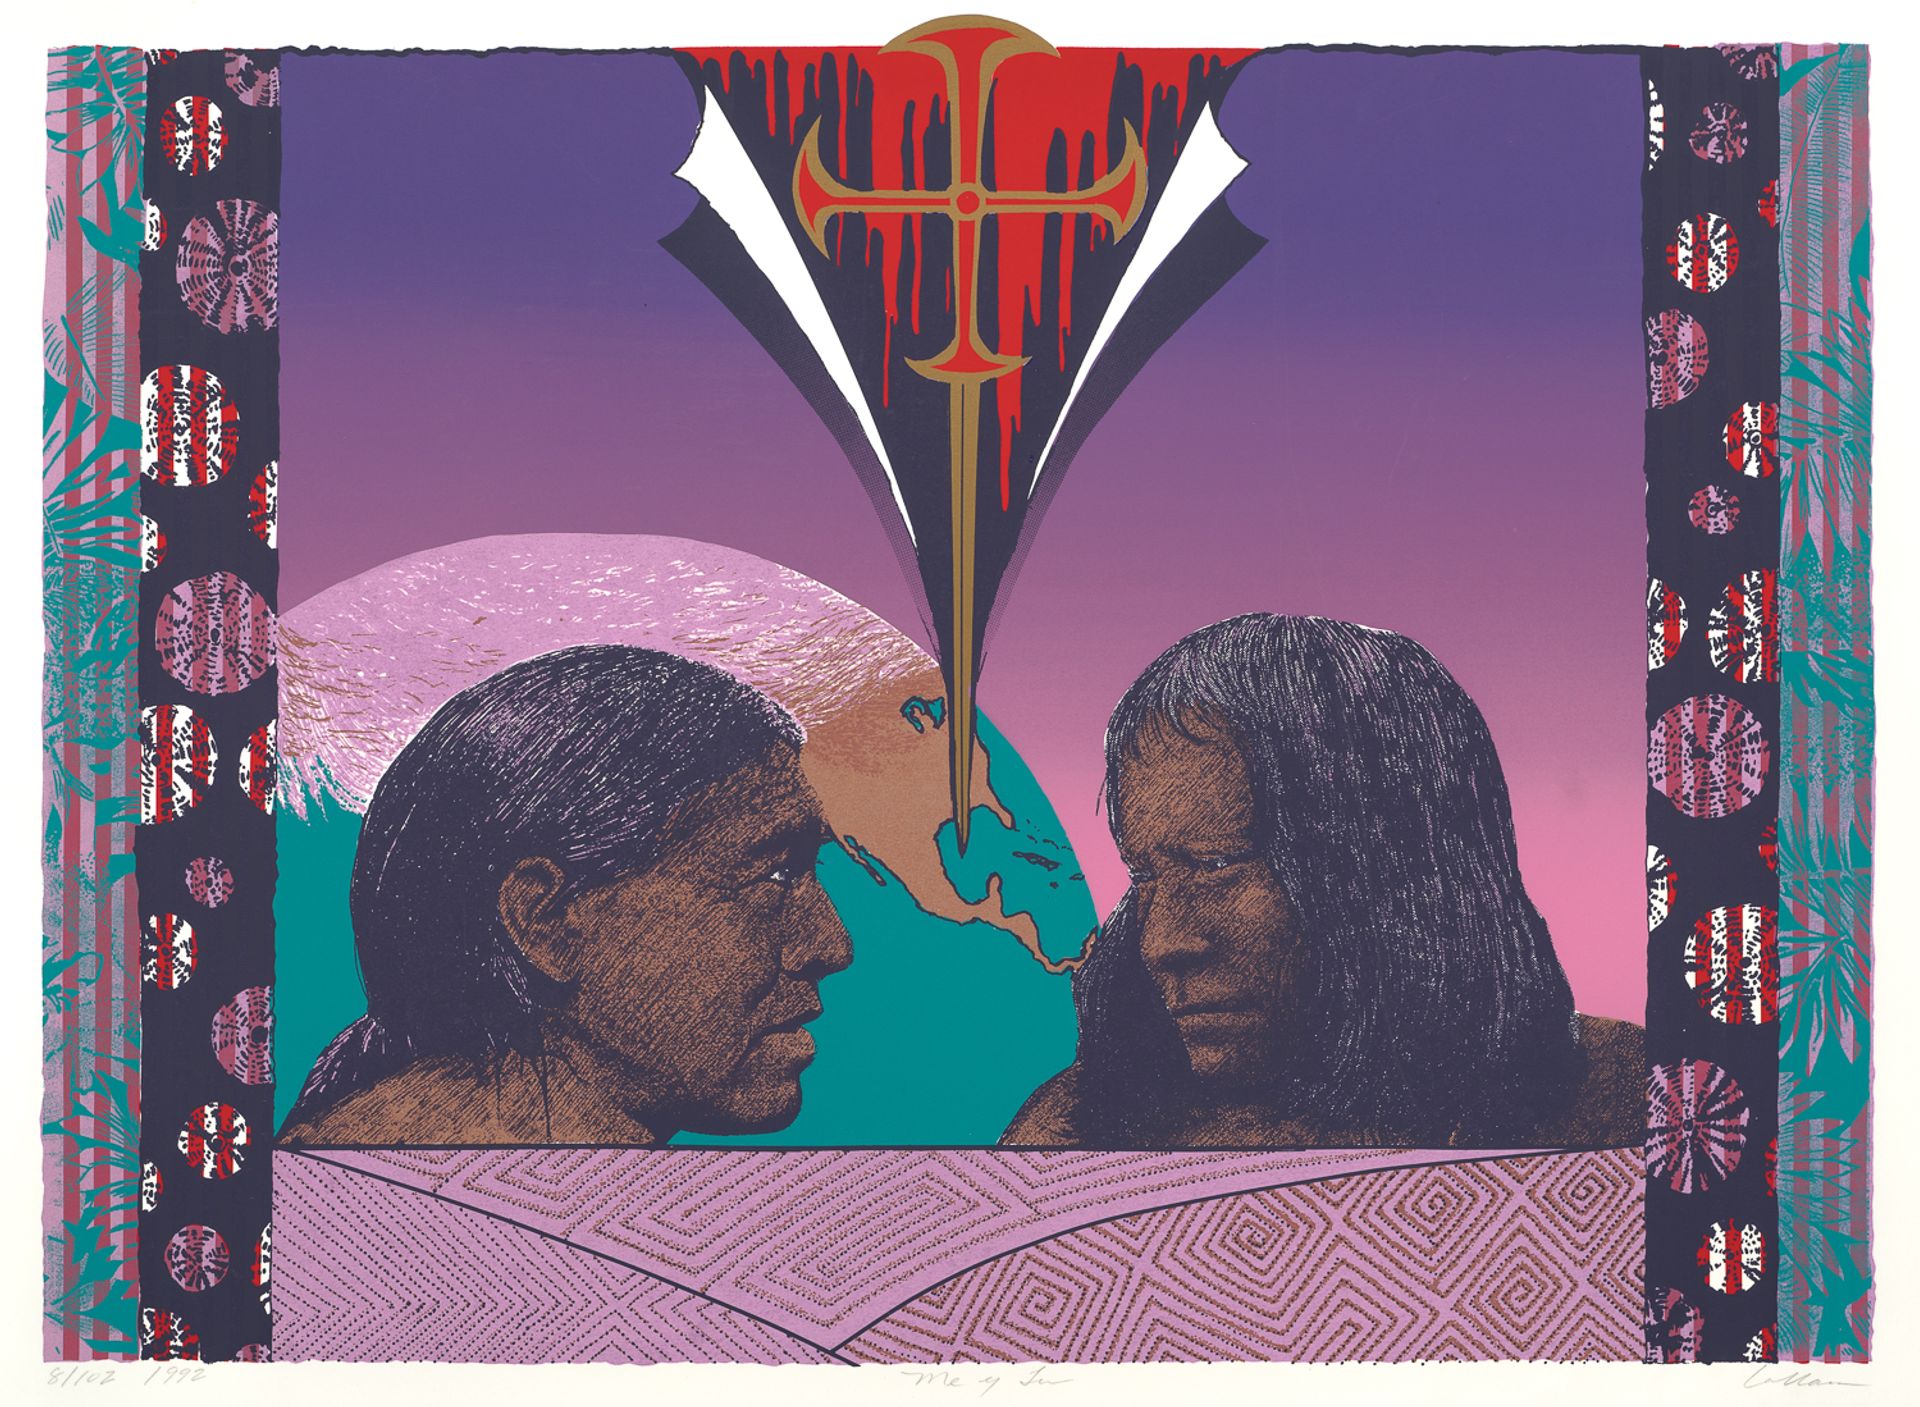 Jean LaMarr, Me y Tu (1992). Collection of the Nevada Museum of Art, purchased with funds provided by the Orchard House Foundation © Jean LaMarr.